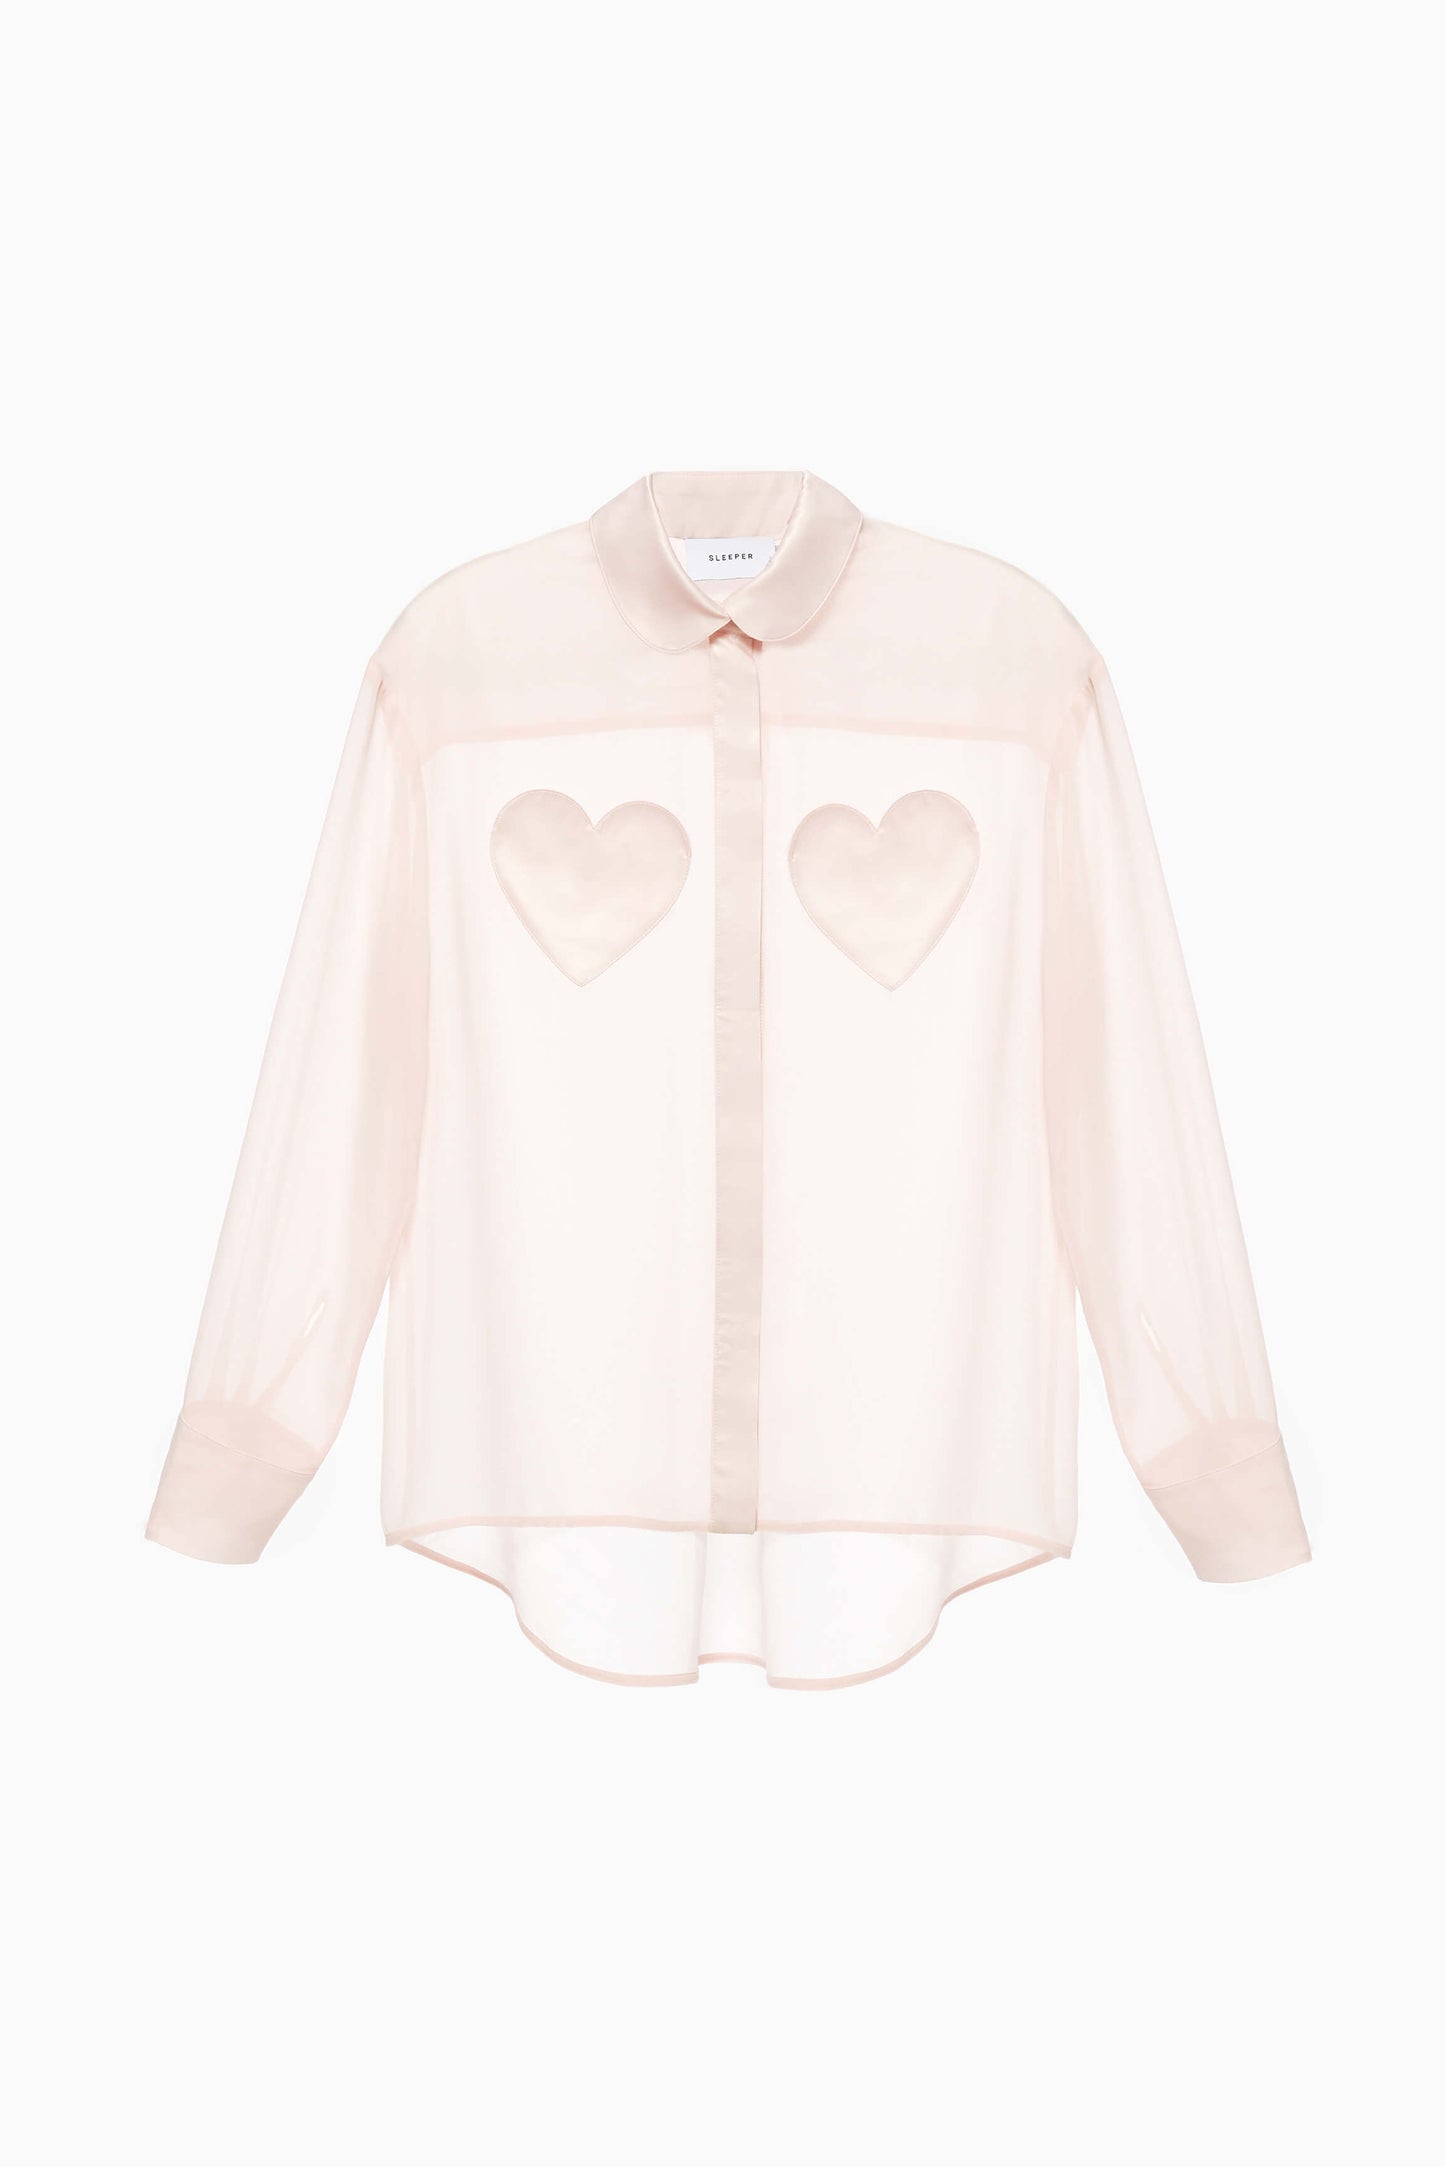 Montmartre Shirt in Off-White